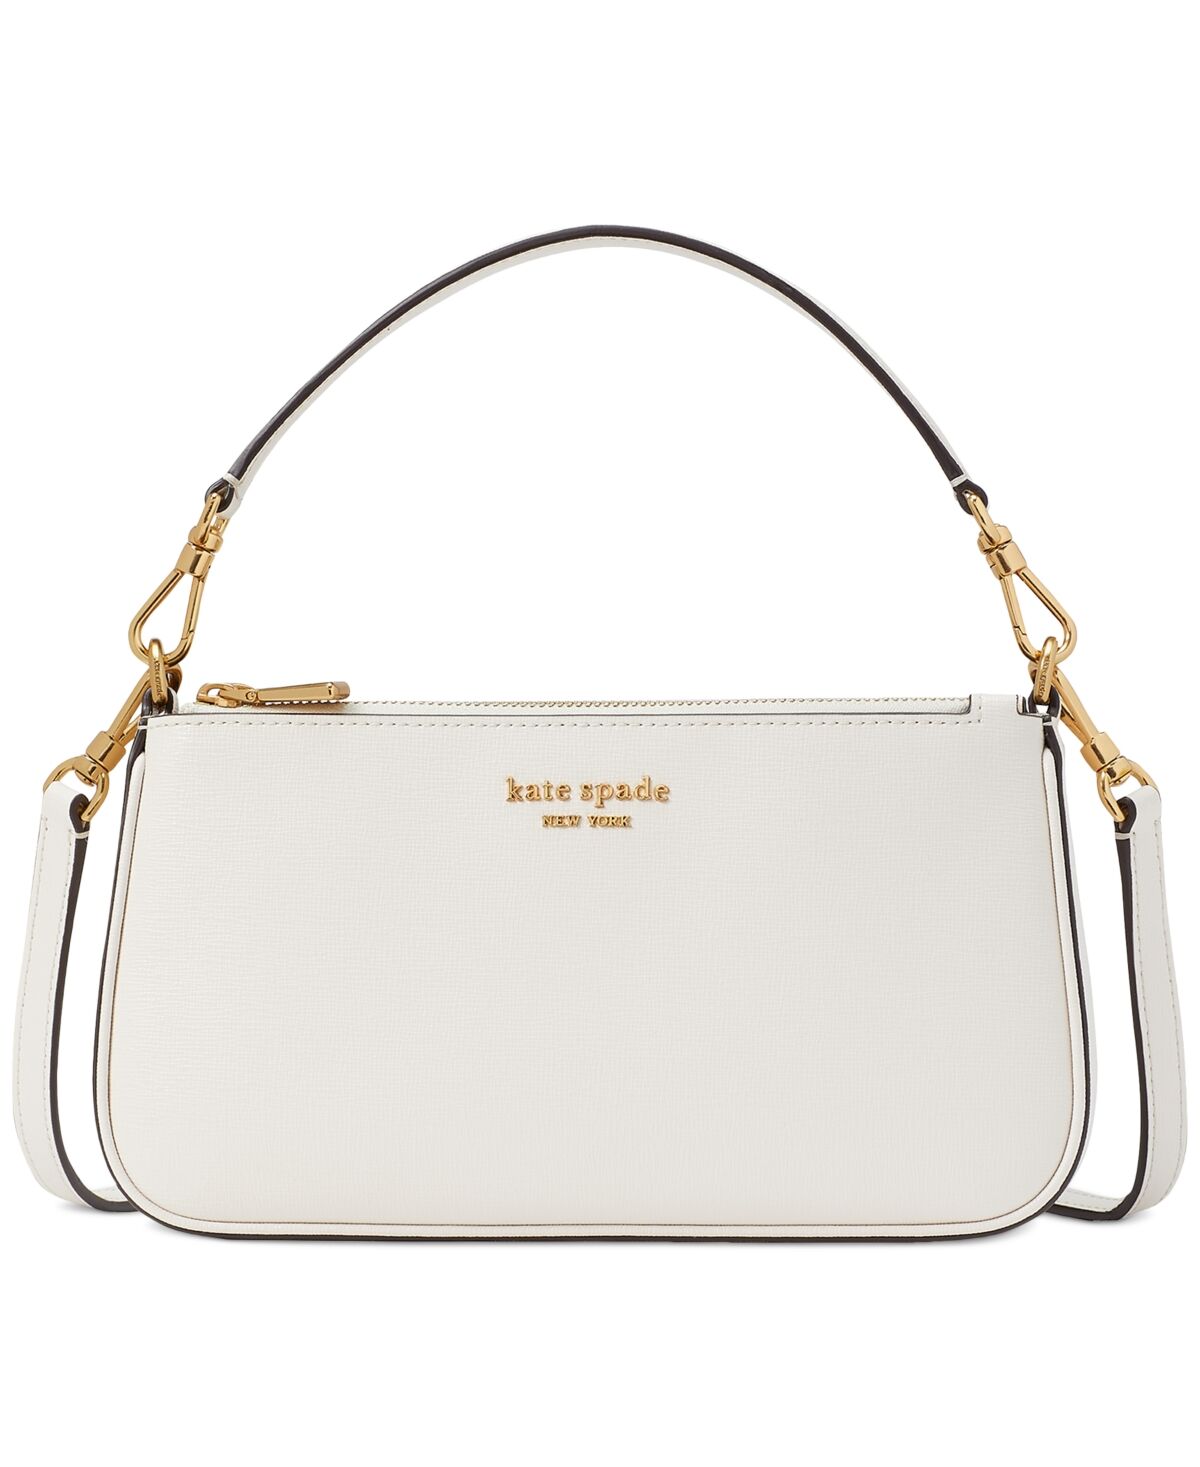 kate spade new york Morgan Saffiano Leather Small East West Crossbody - Parchment